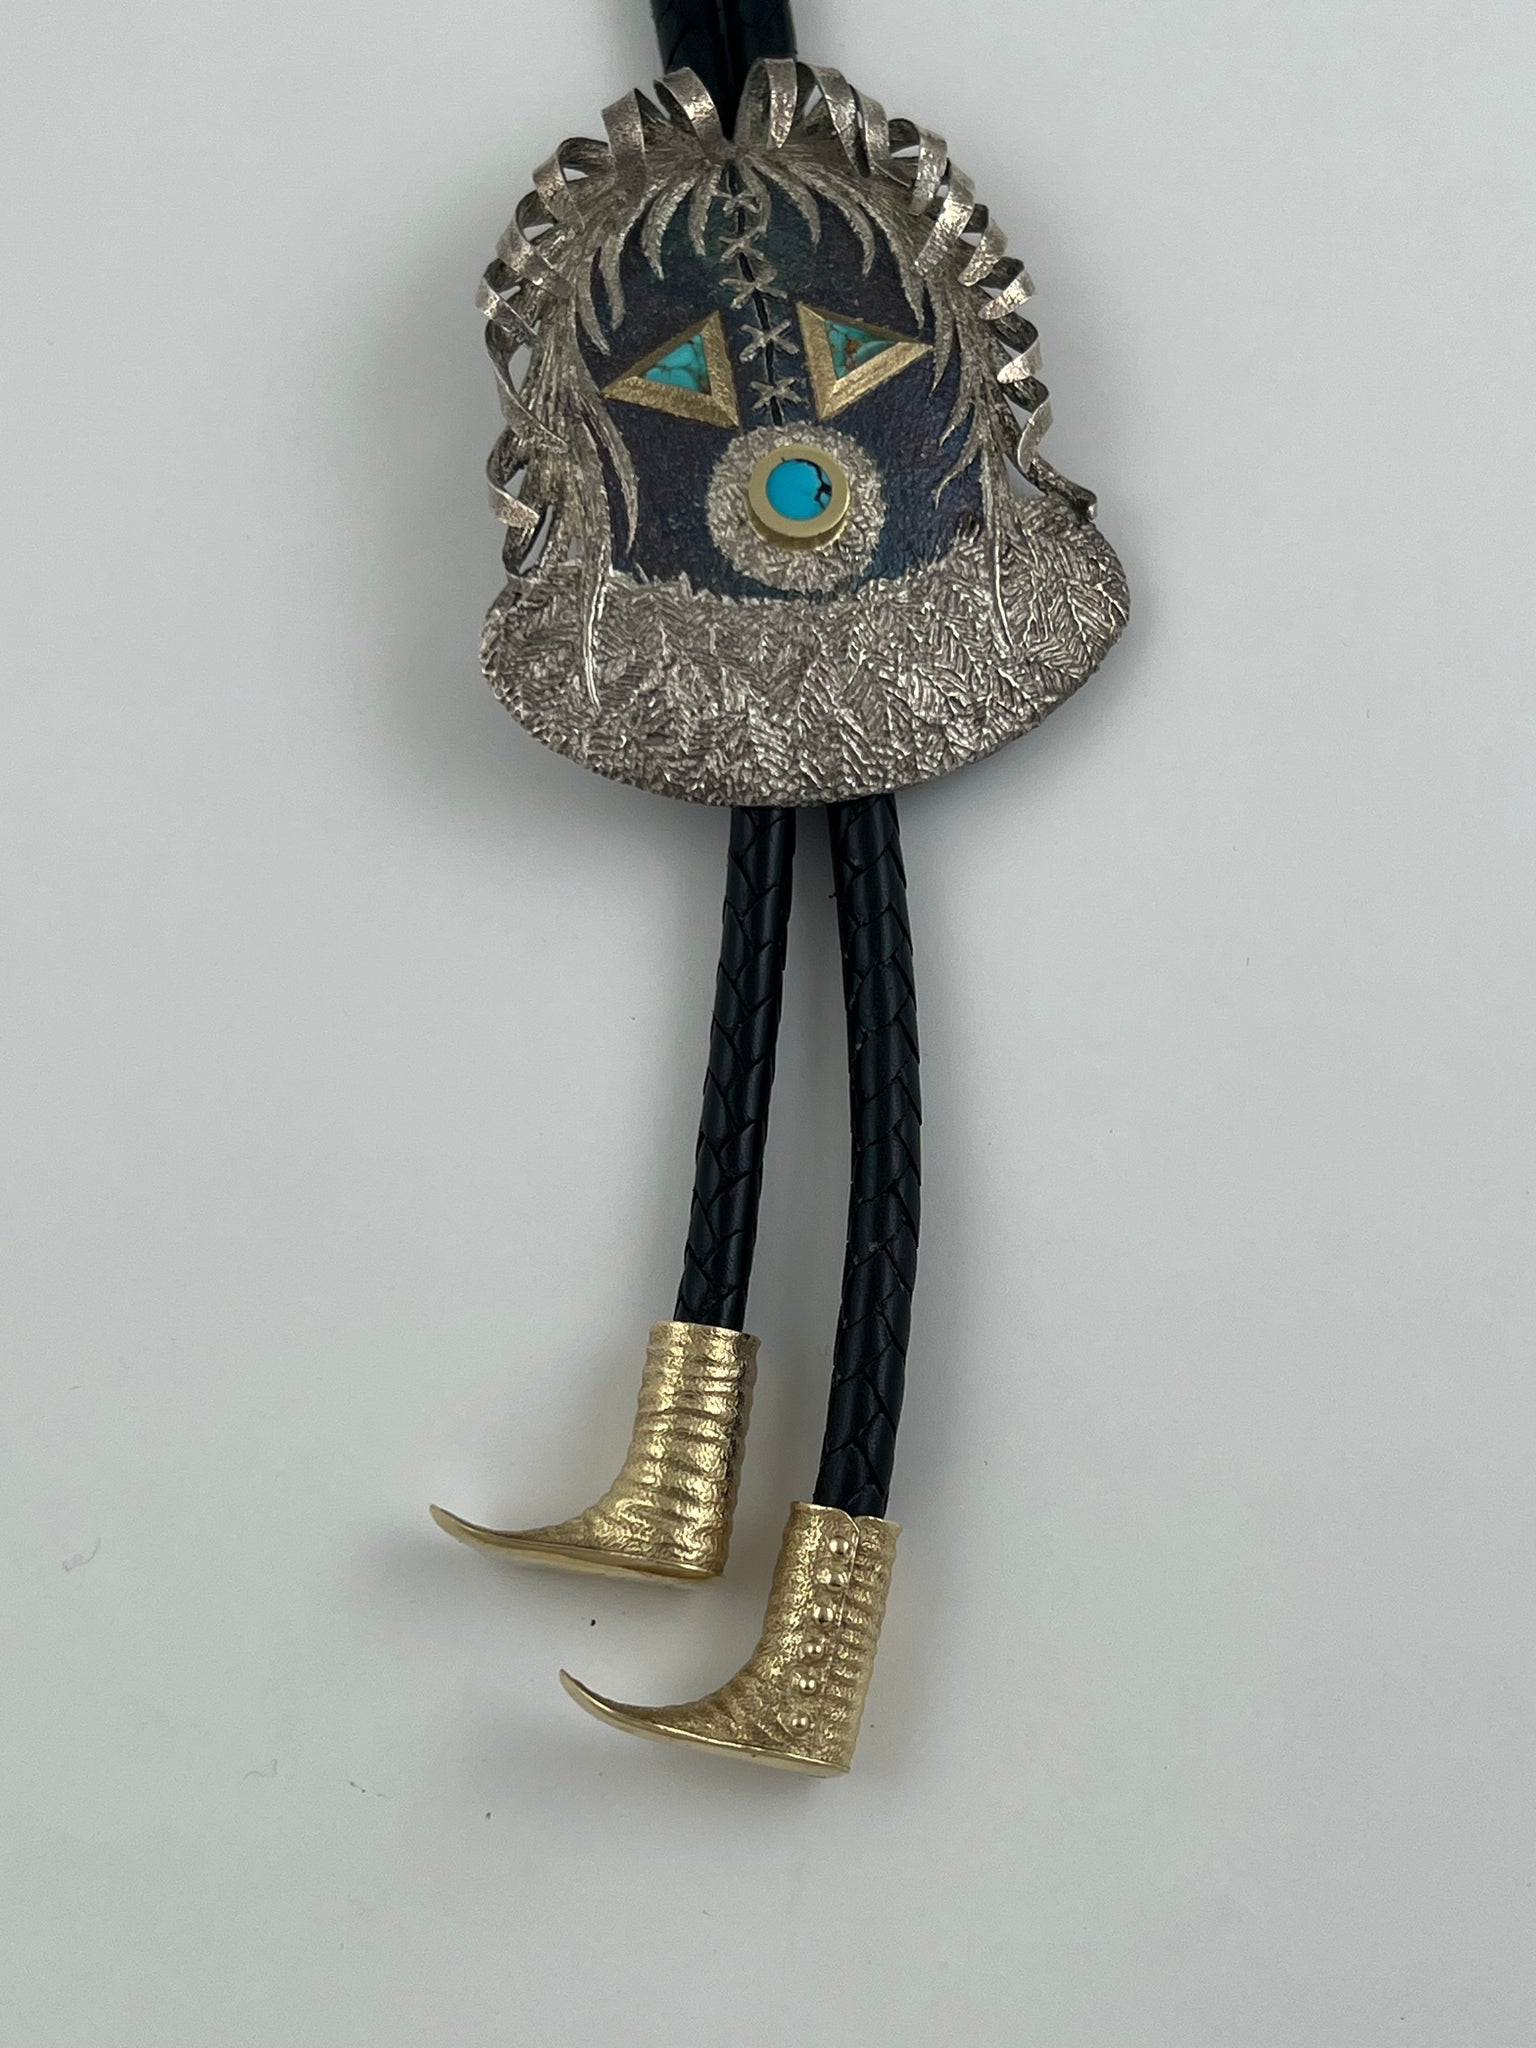 SOLD Ric Charlie Yei Bolo Tie